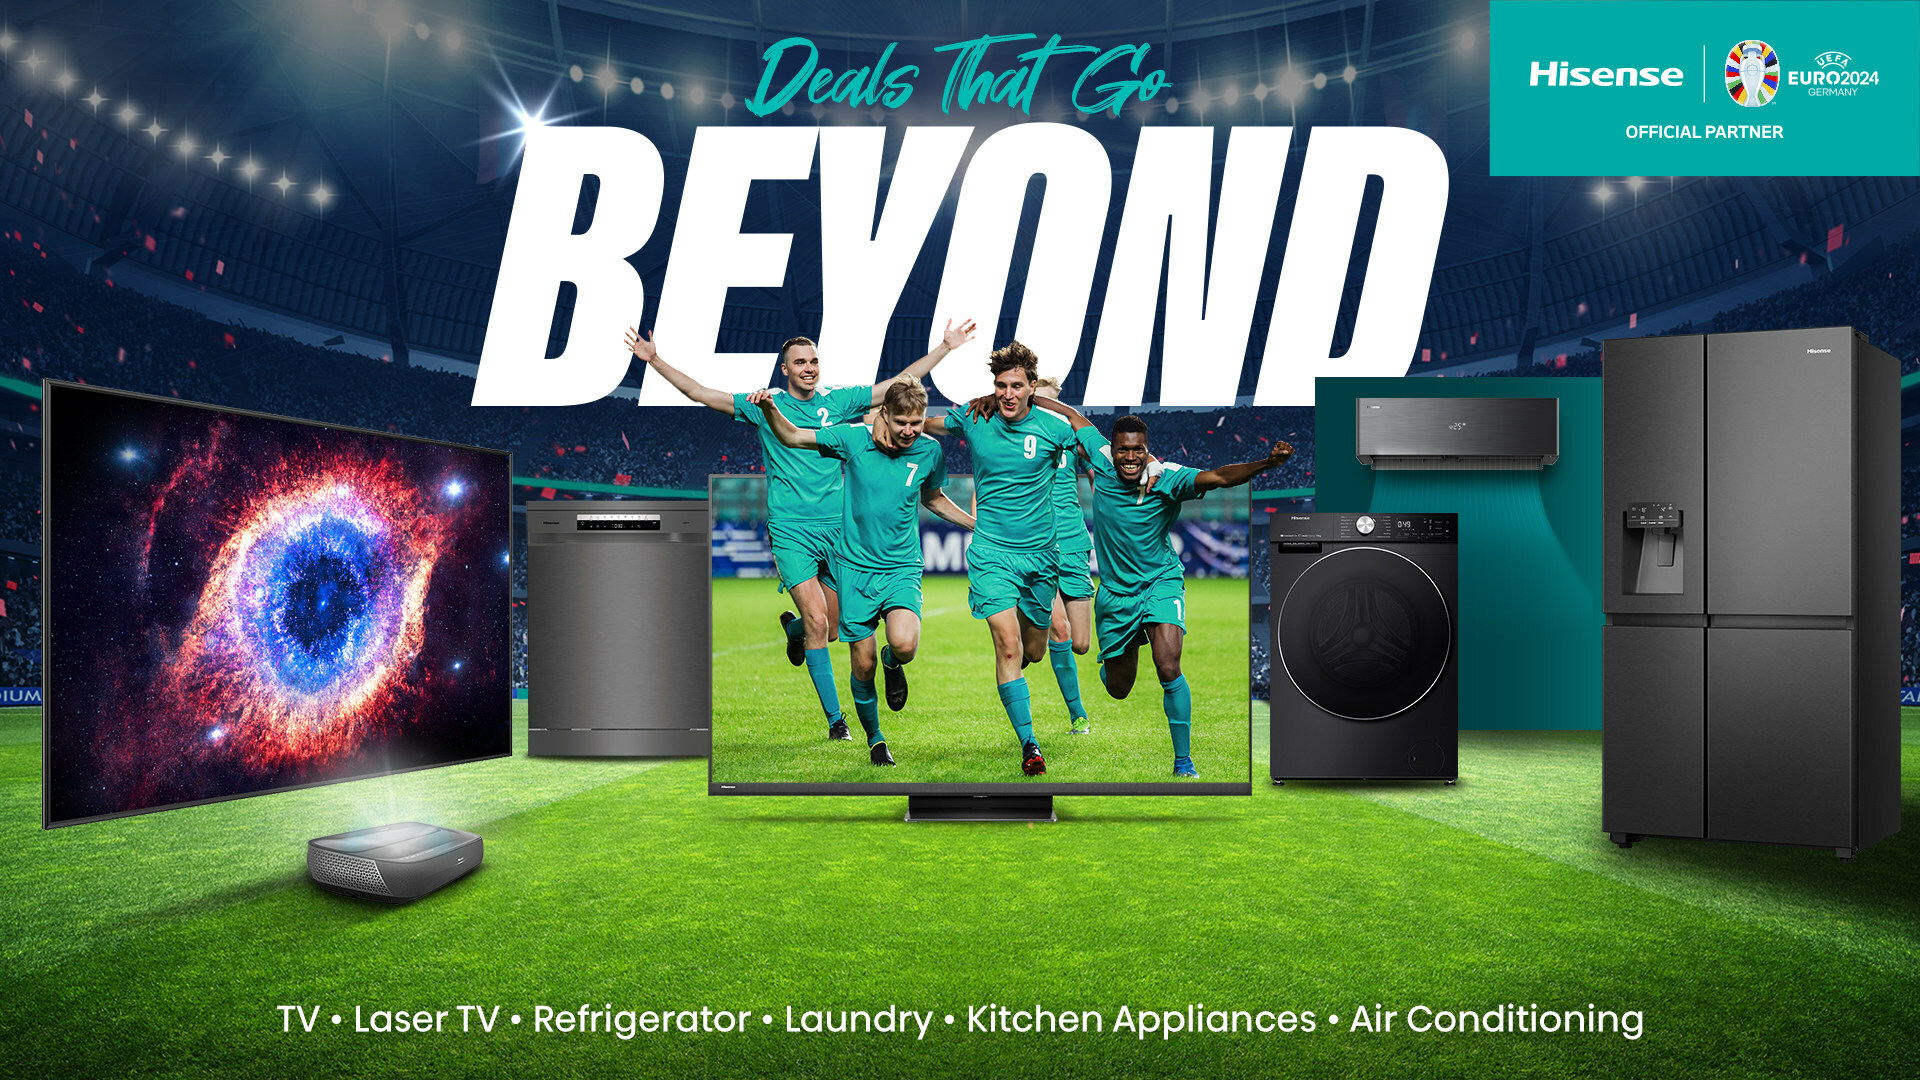 Hisense Unveils “Deals That Go BEYOND” End-of-year Campaign for the Holiday Season